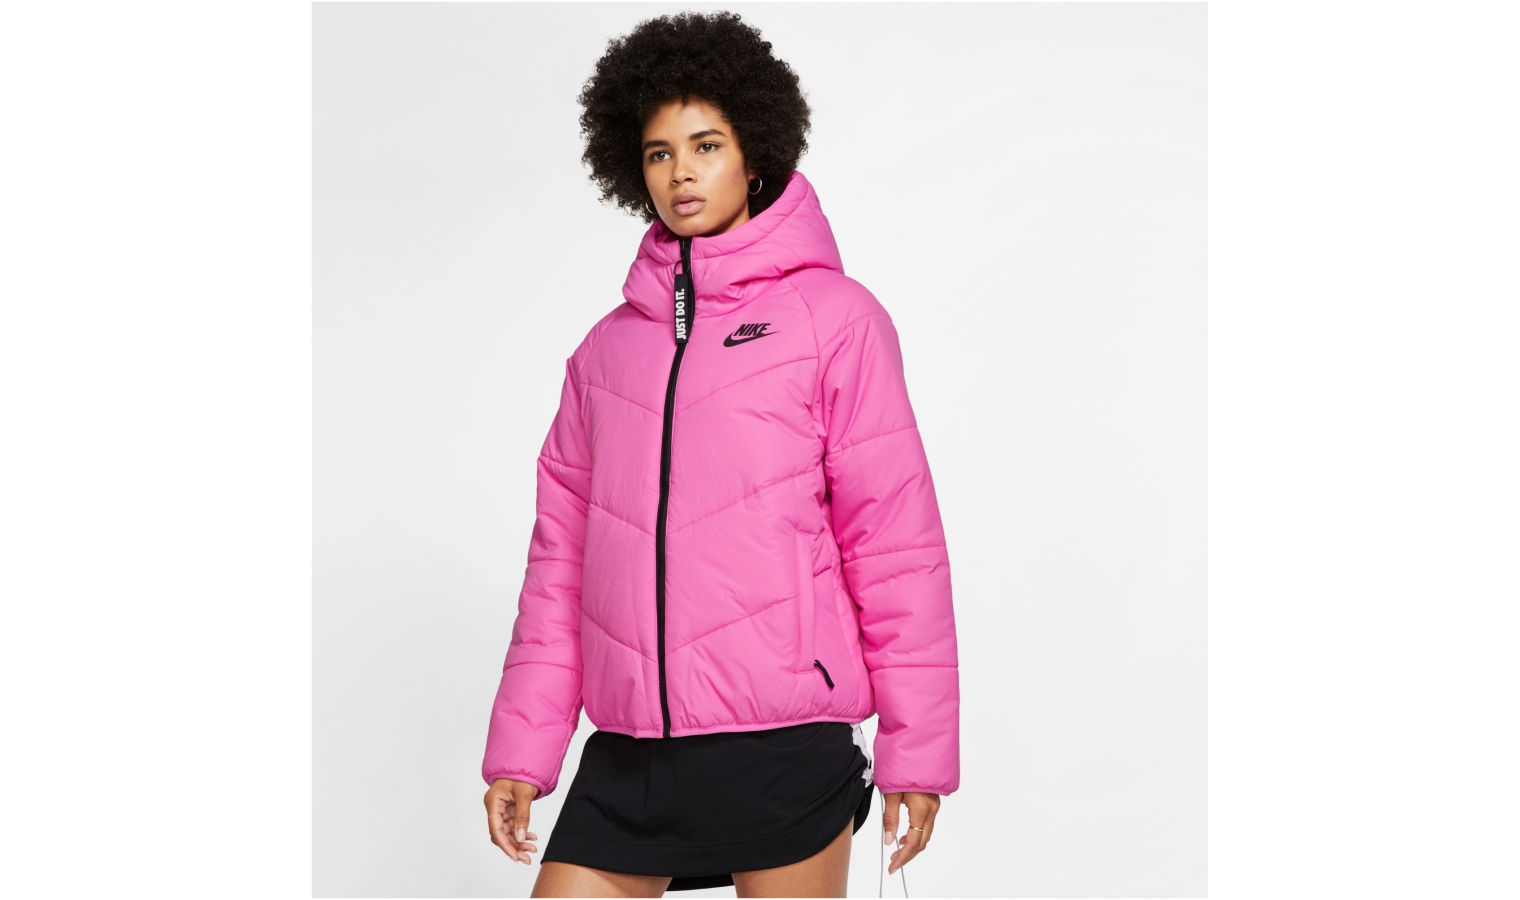 Relative excuse stress Womens jacket Nike NSW WR SYN FILL JKT HD W pink | AD Sport.store